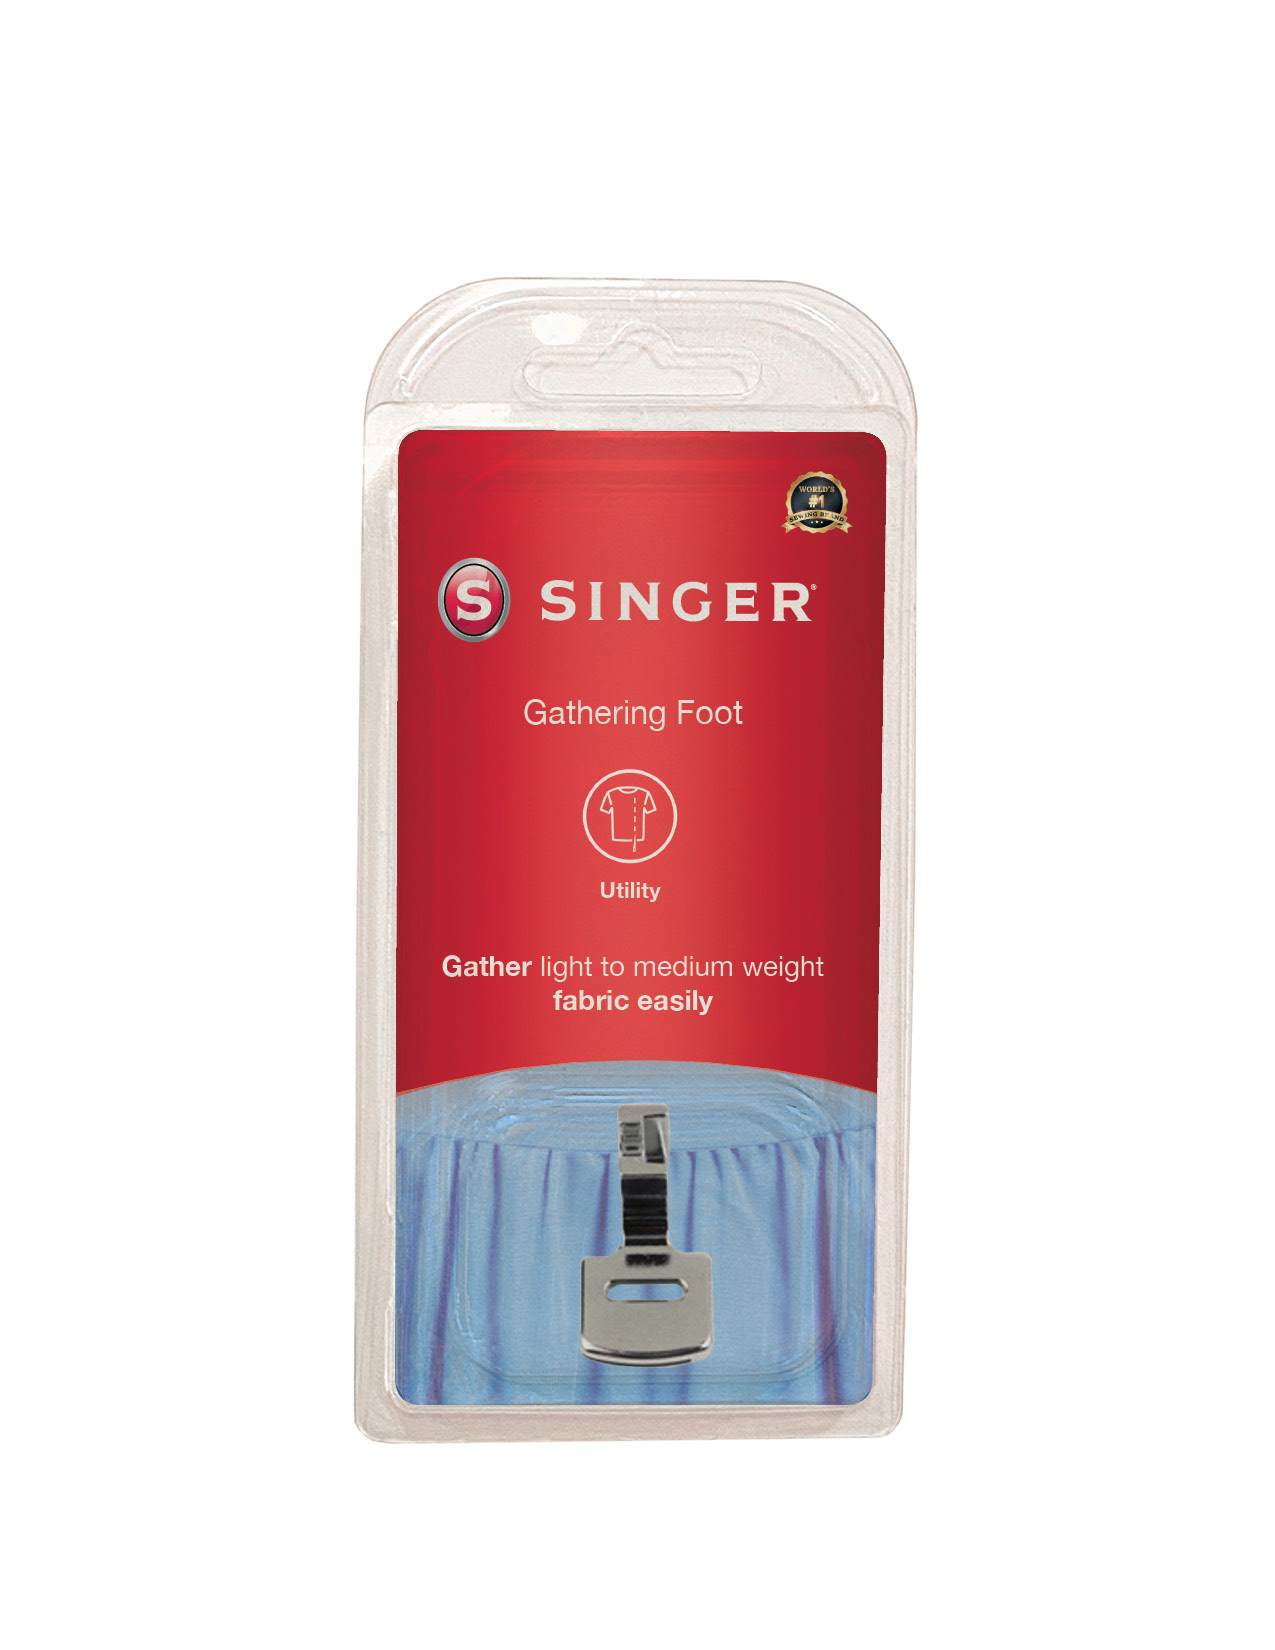 Singer® Gathering Foot Carded Pack - image 1 of 2